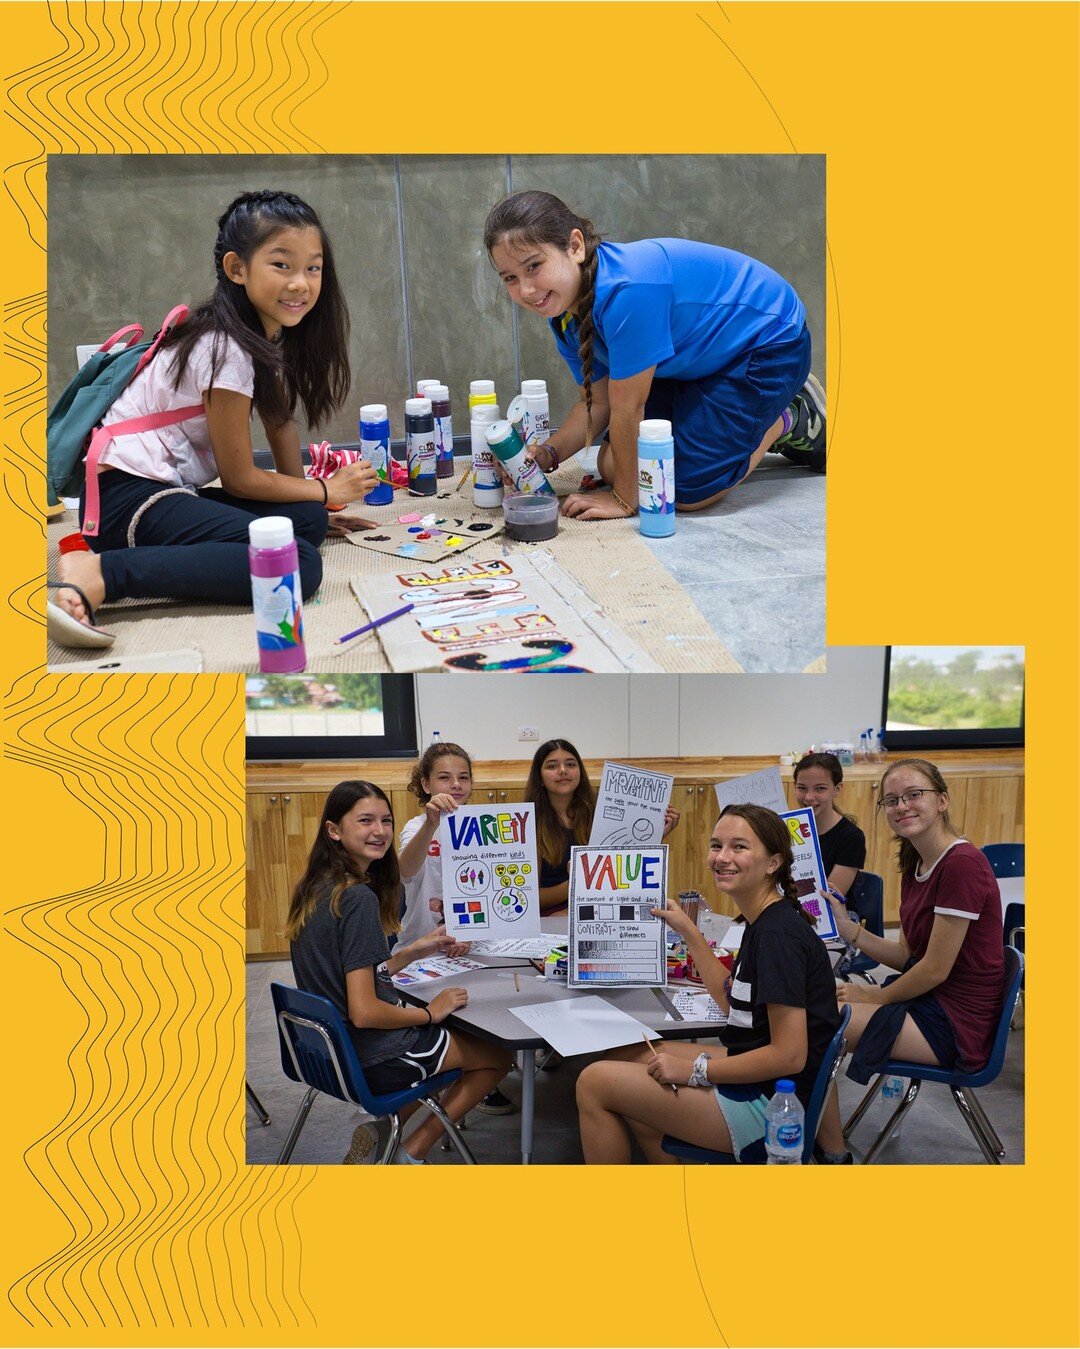 The ICS student body represents over 22 nations, which make it an international community. Each school day is an opportunity for students to learn and grow culturally through interaction with friends from across the globe. ICS students have gain admi